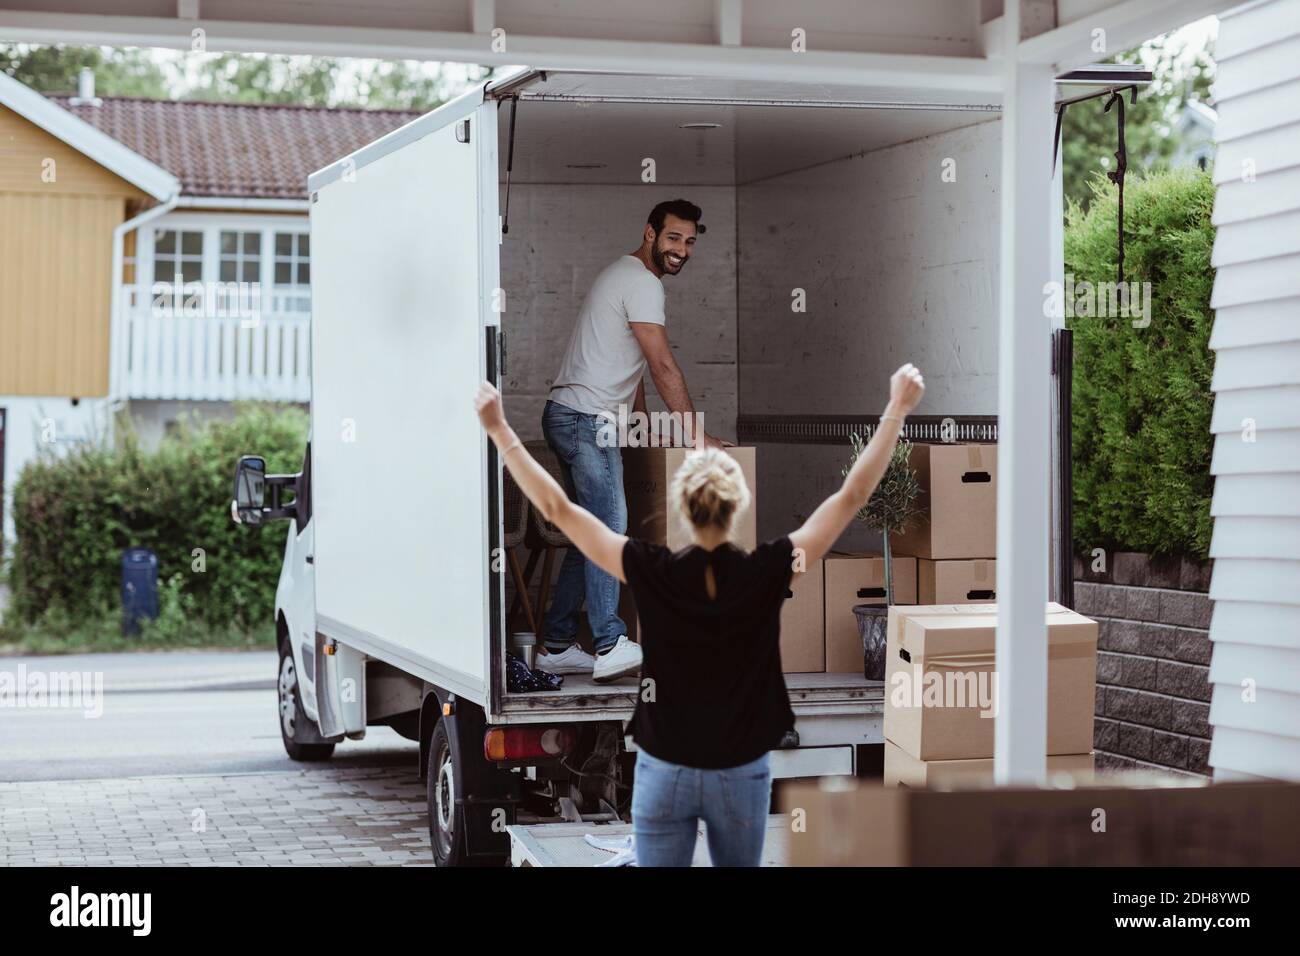 Rear view of female with arms raised cheering while smiling male partner unloading boxes Stock Photo